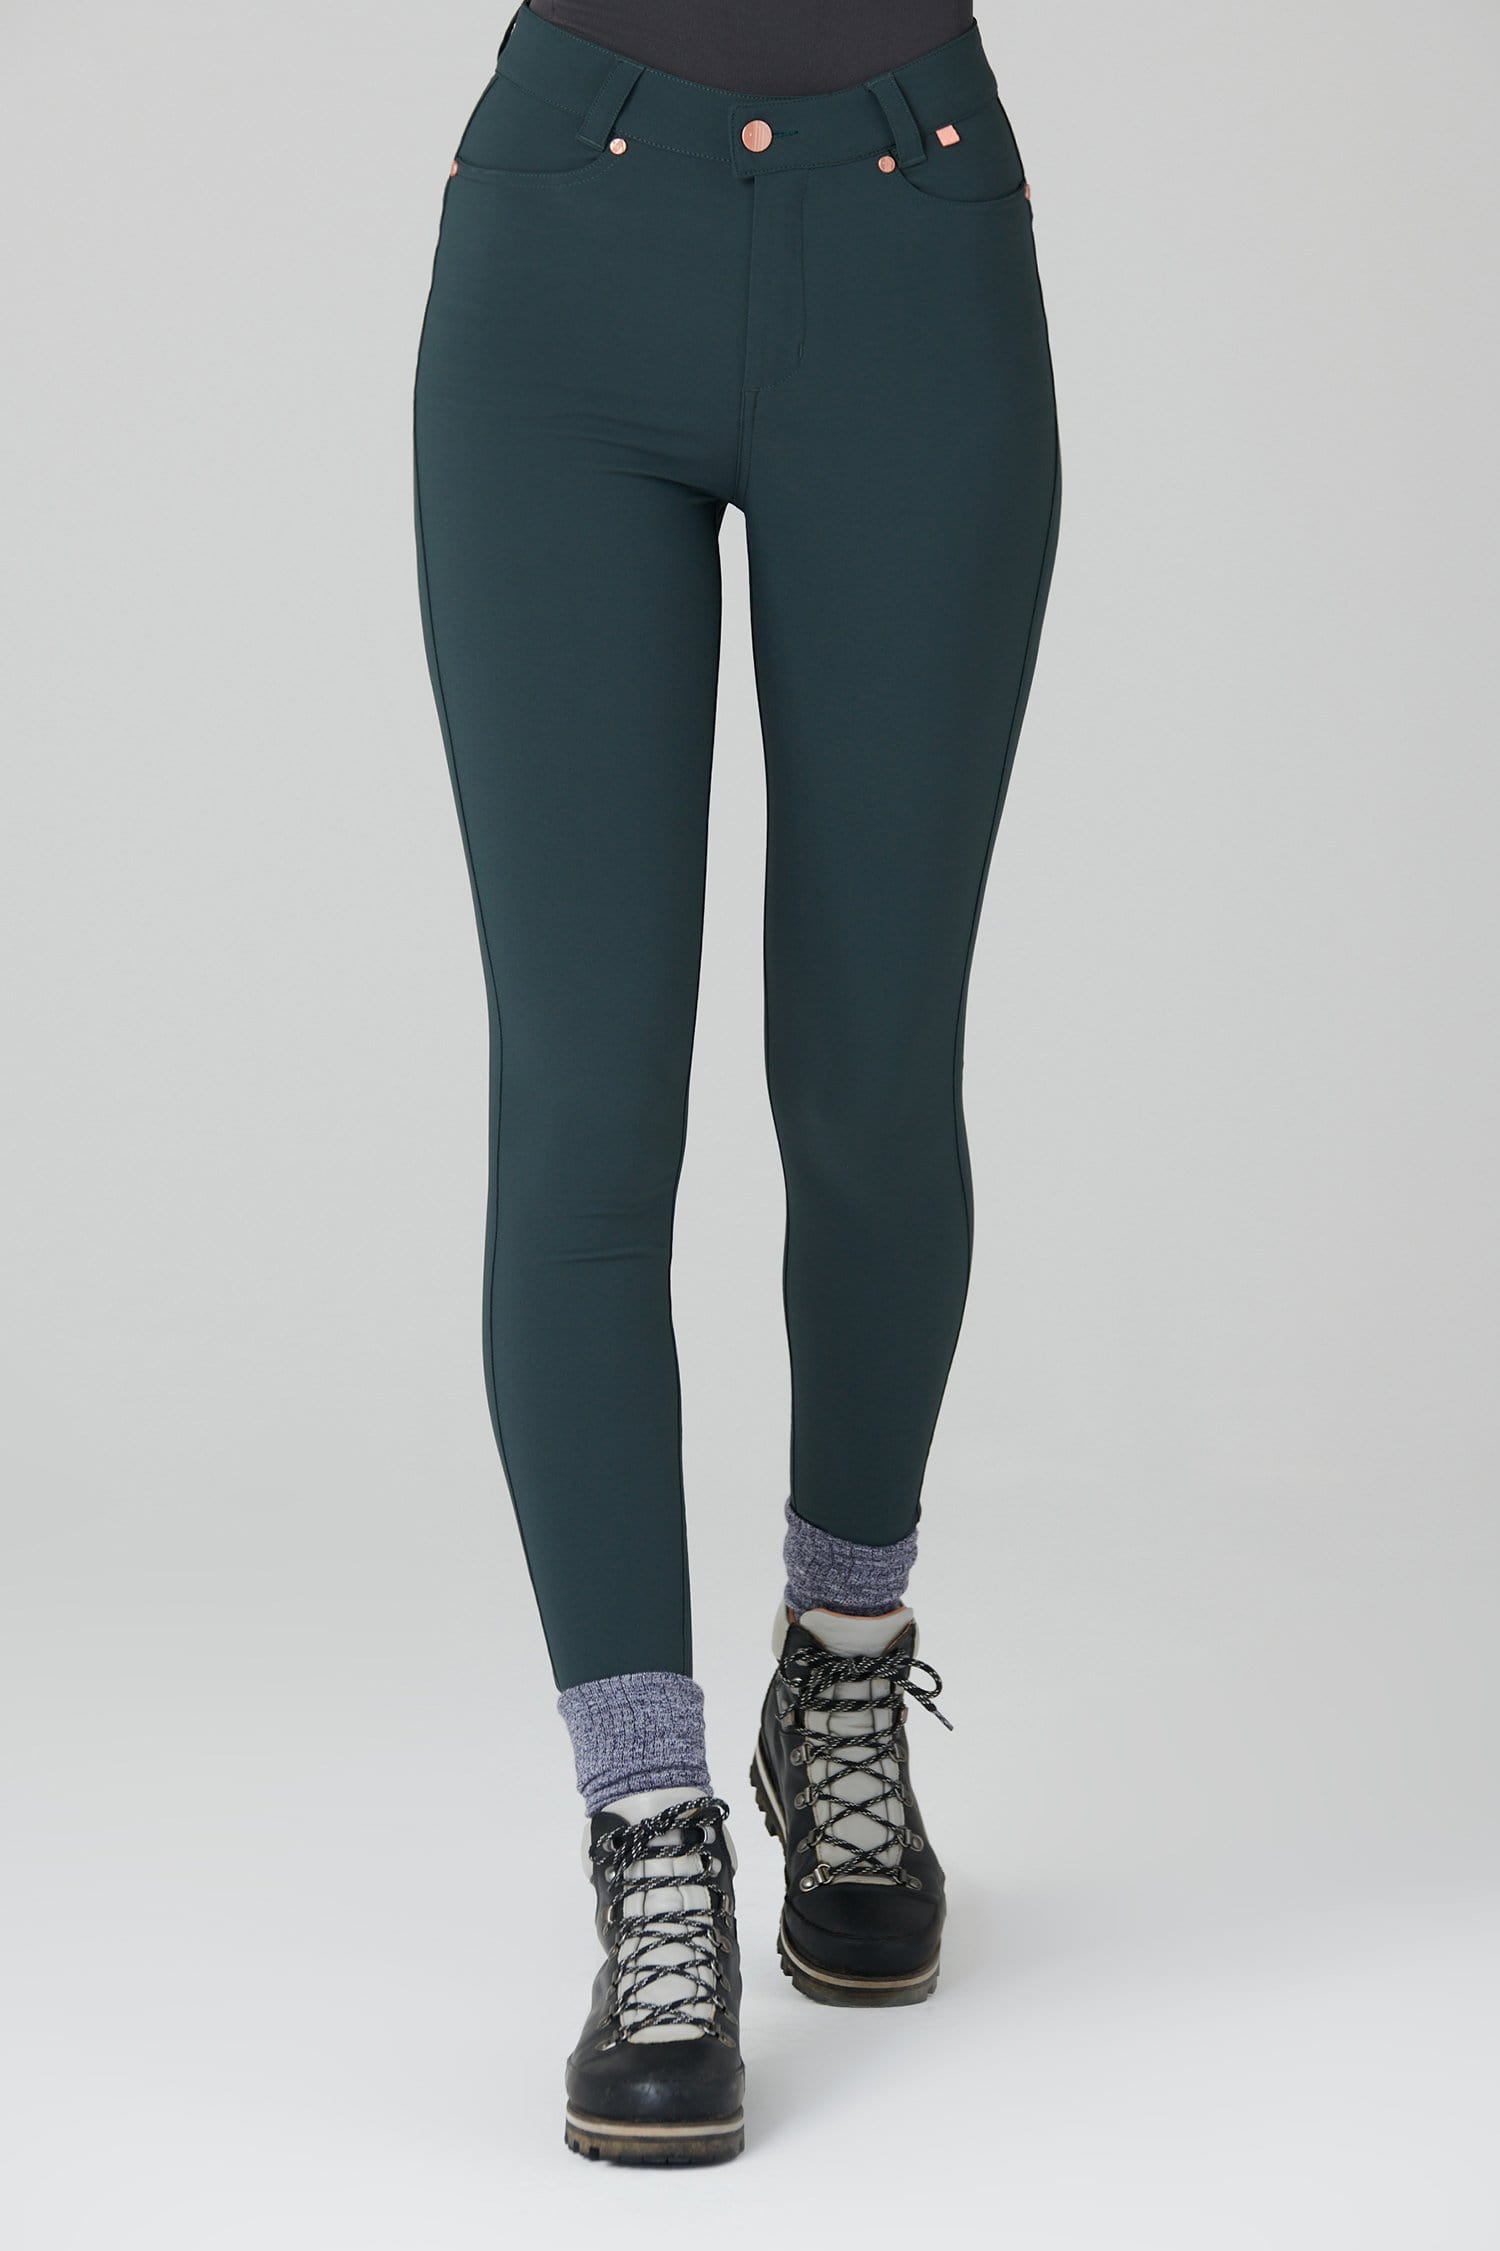 Thermal Skinny Outdoor Trousers - Forest Green - 30r / Uk12 - Womens - Acai Outdoorwear